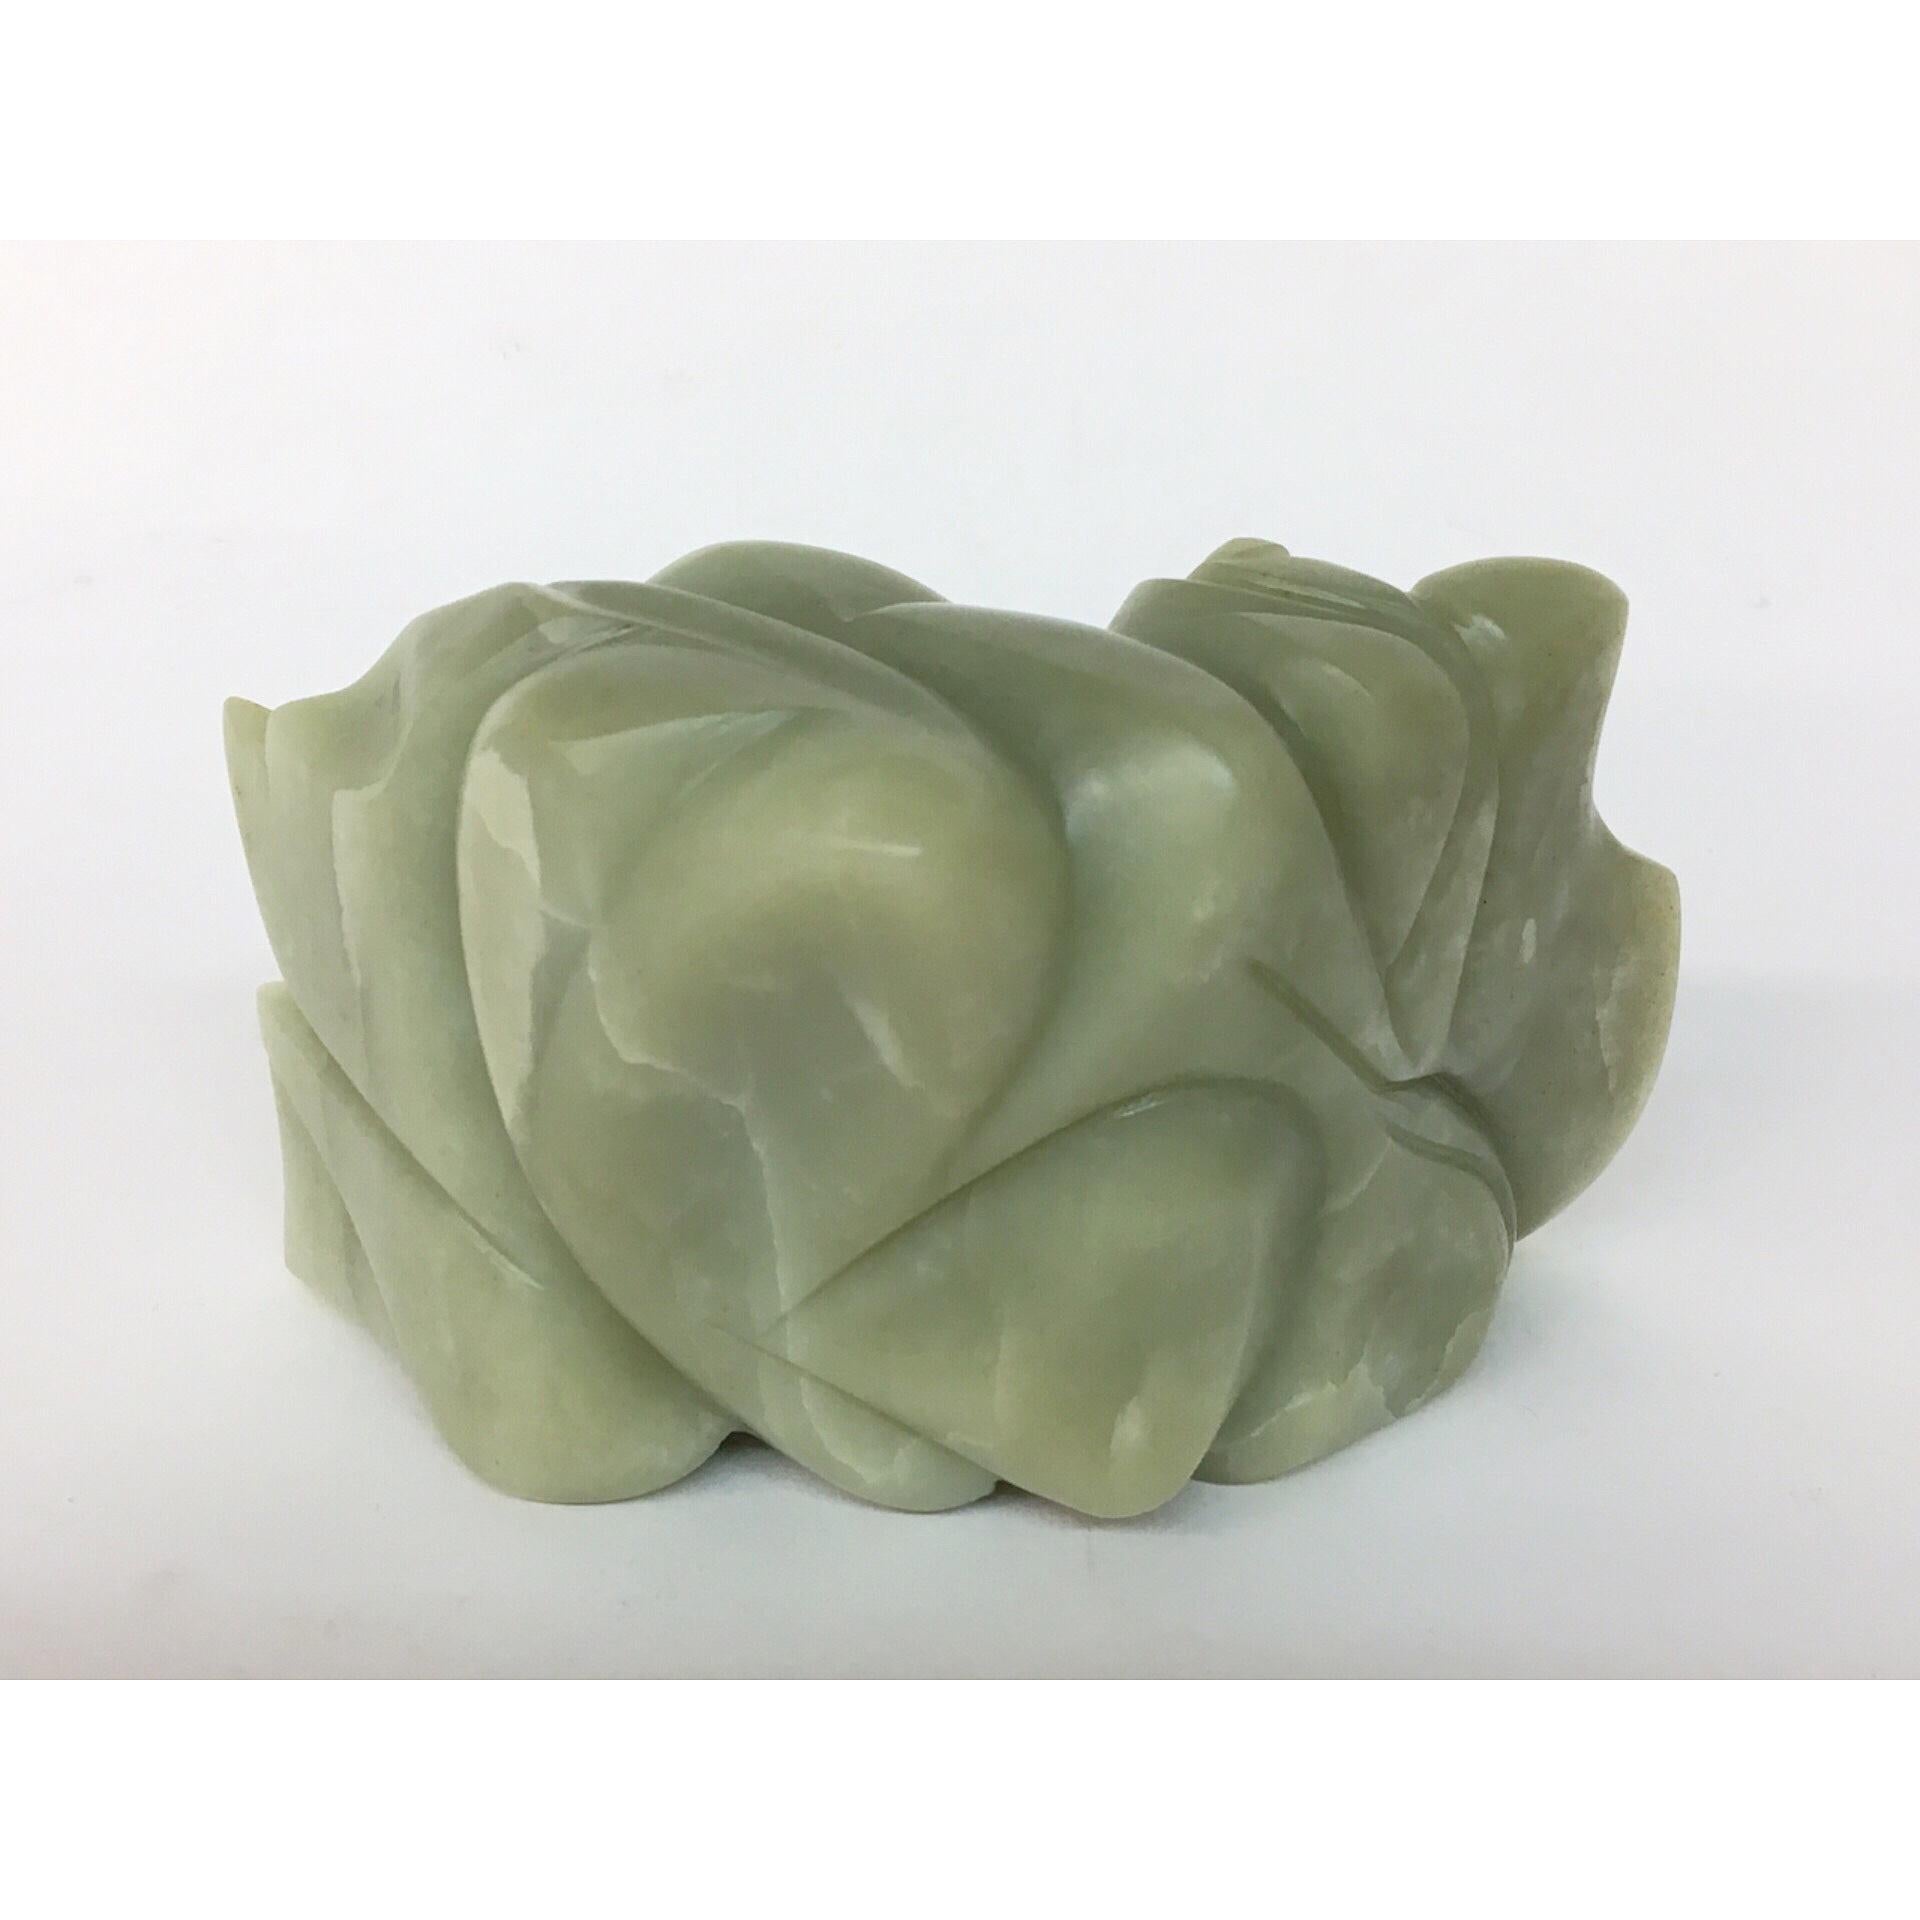 TANGLE Soapstone Sculpture 6 1/2 × 4 × 3 inch by Melanie Newcombe 2